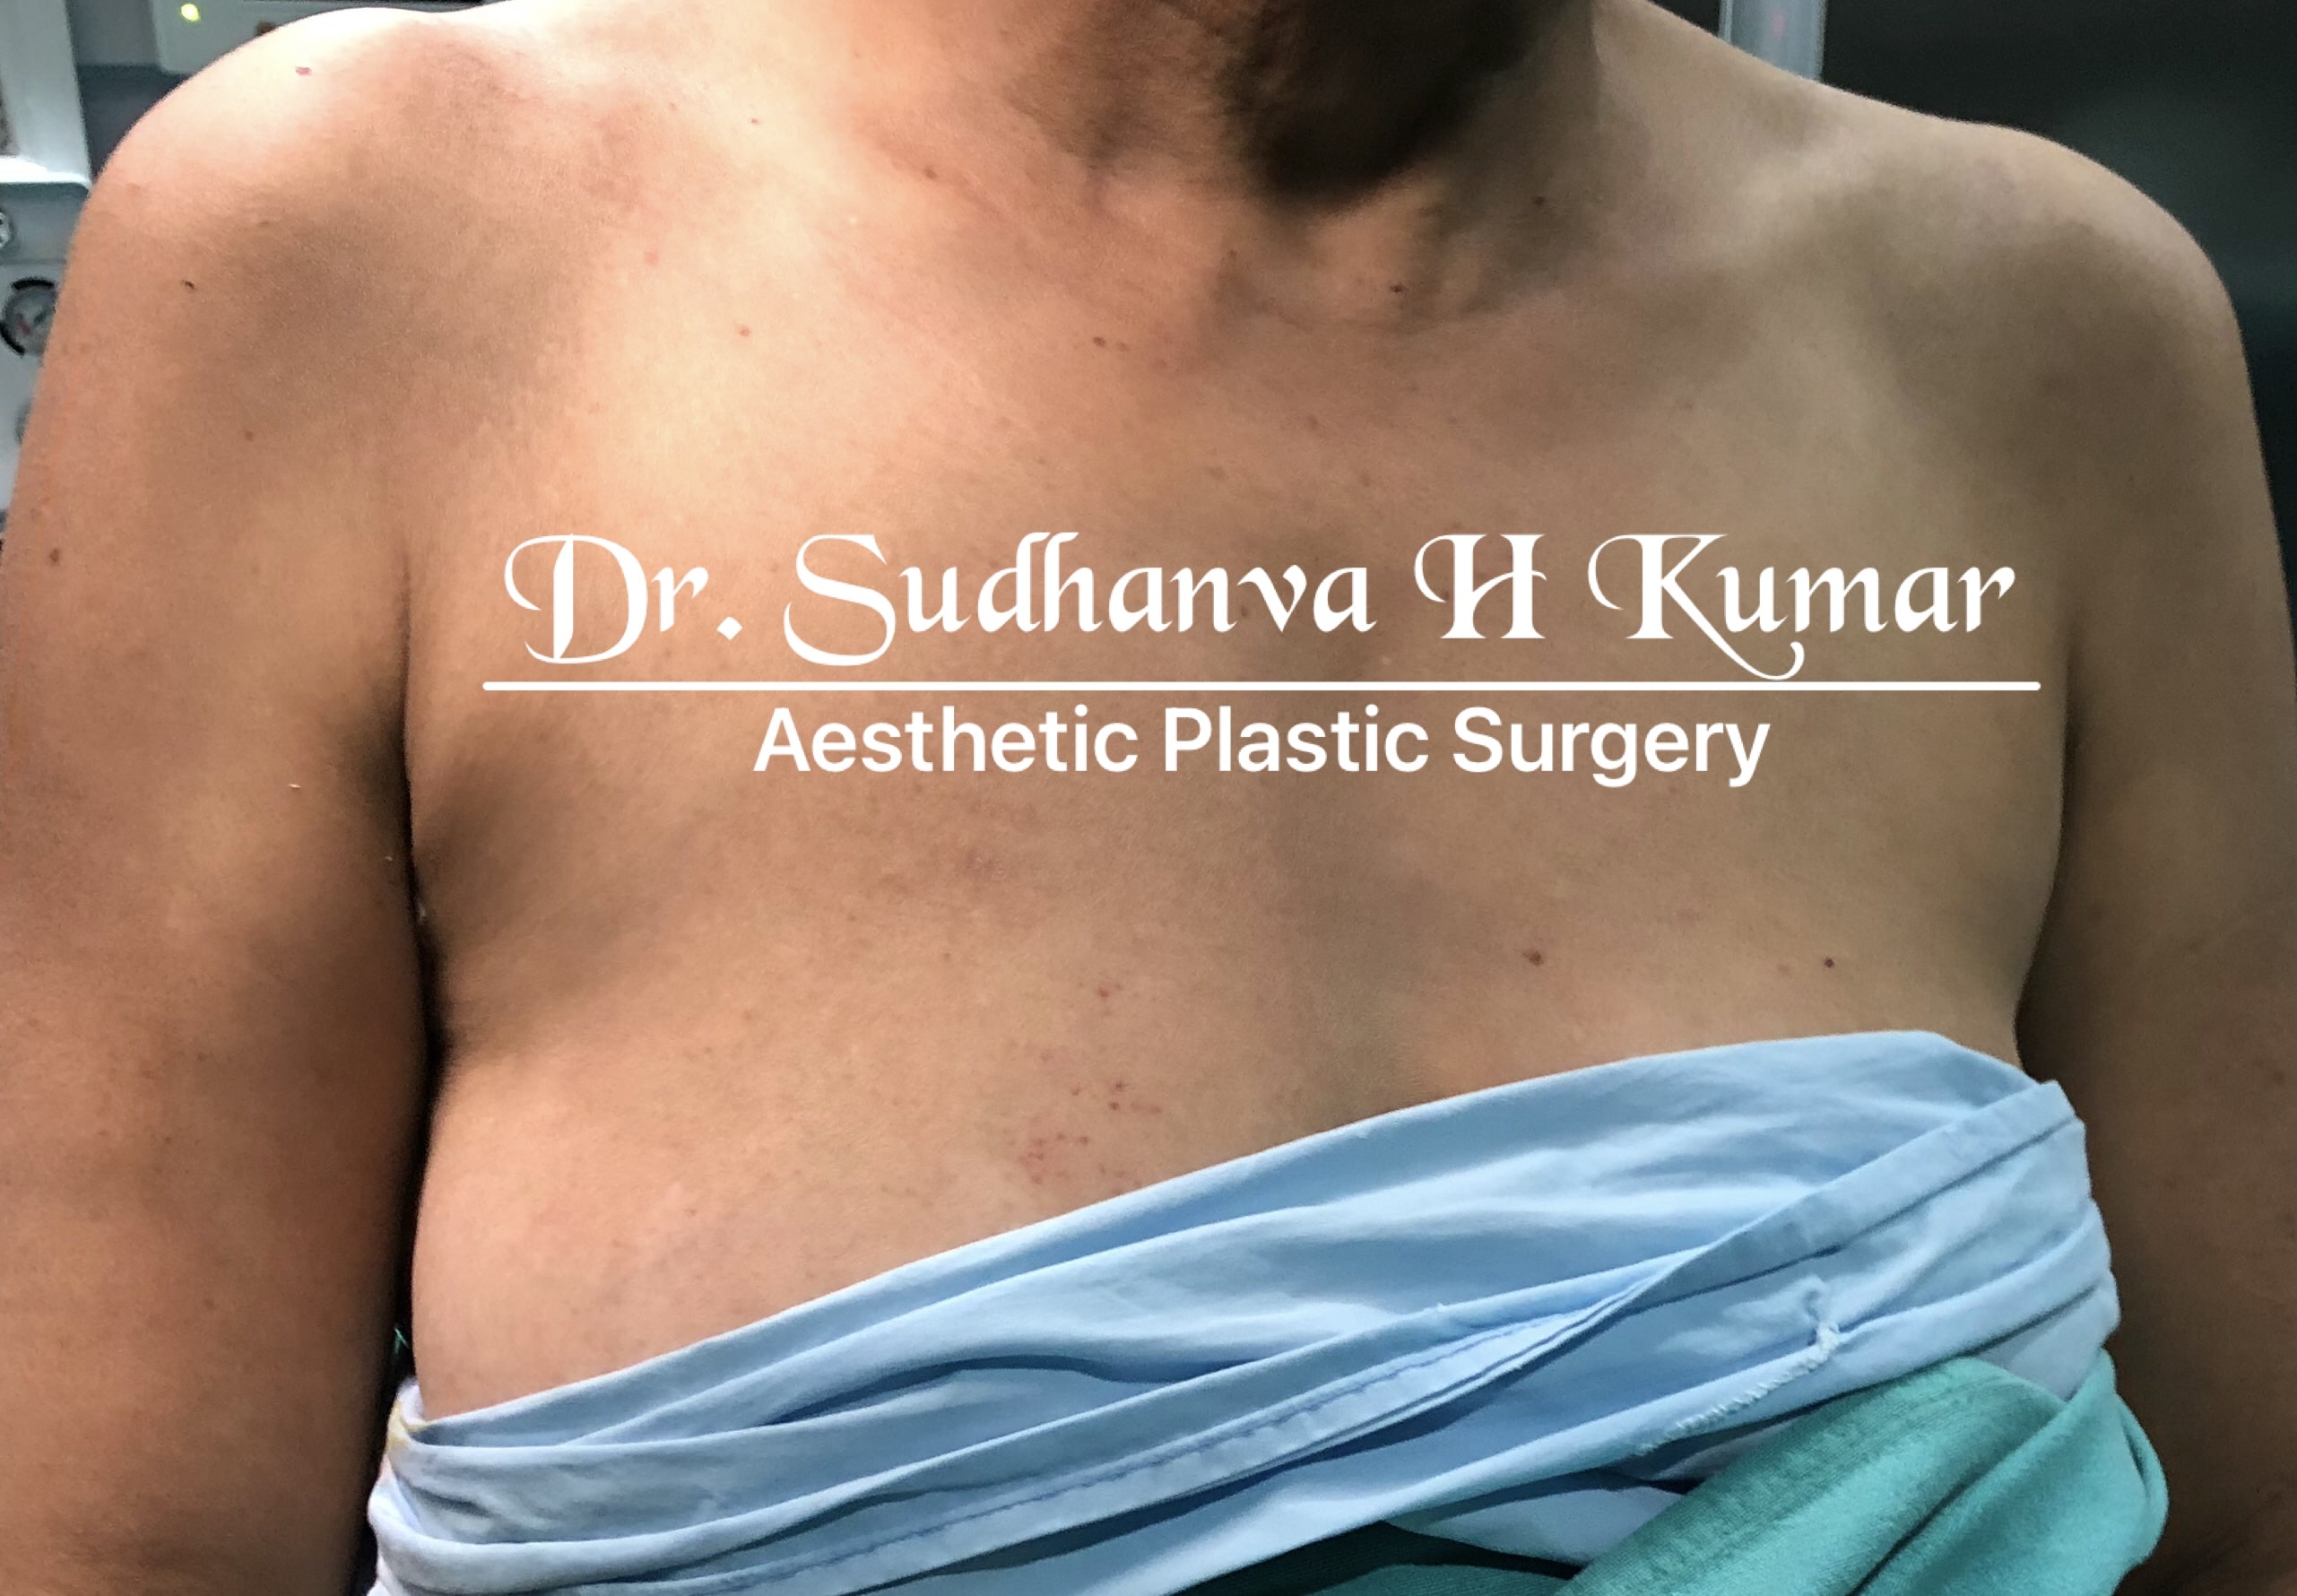 Armpit Fat Removal Surgery in India - Dr. Sudhanva